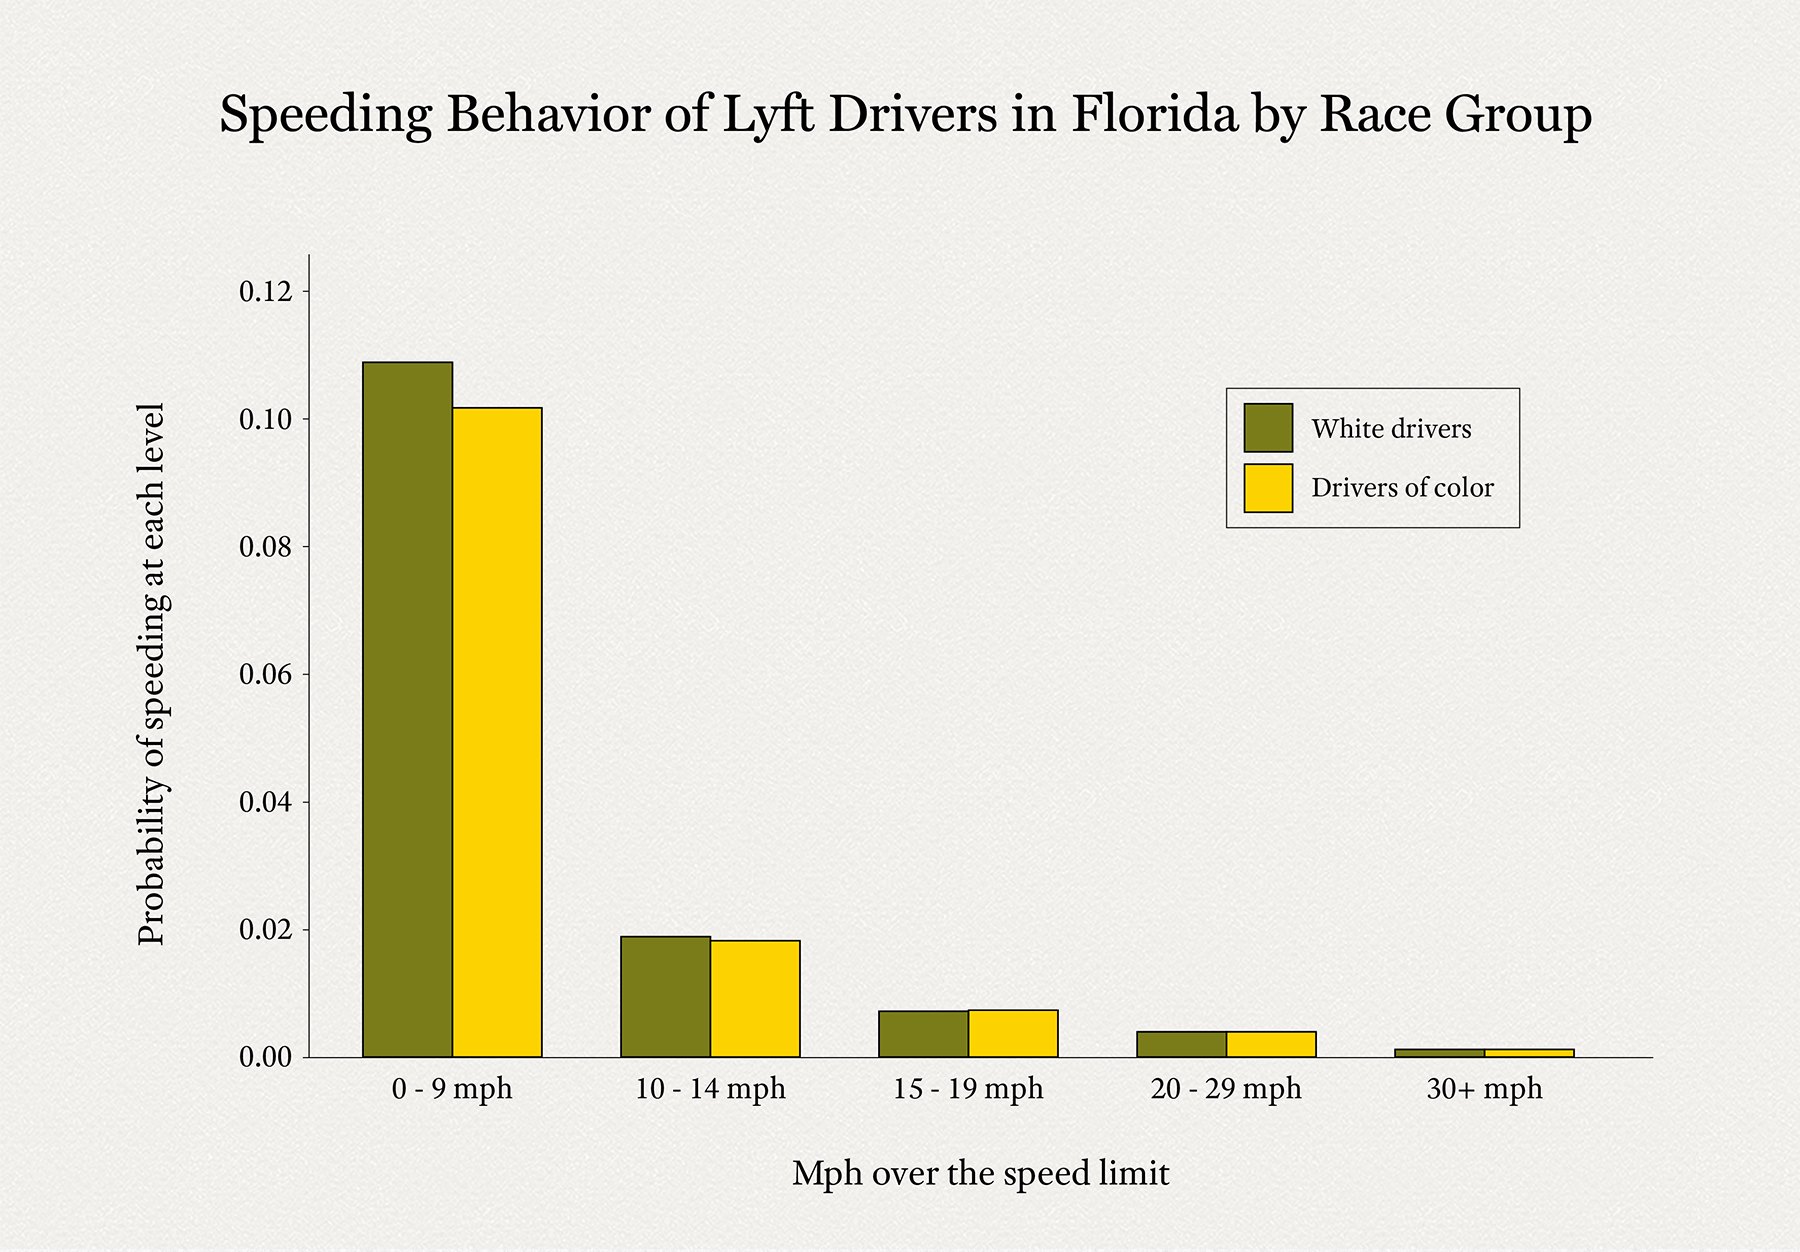 graph showing speeding behavior of Lyft drivers in Florida by race group